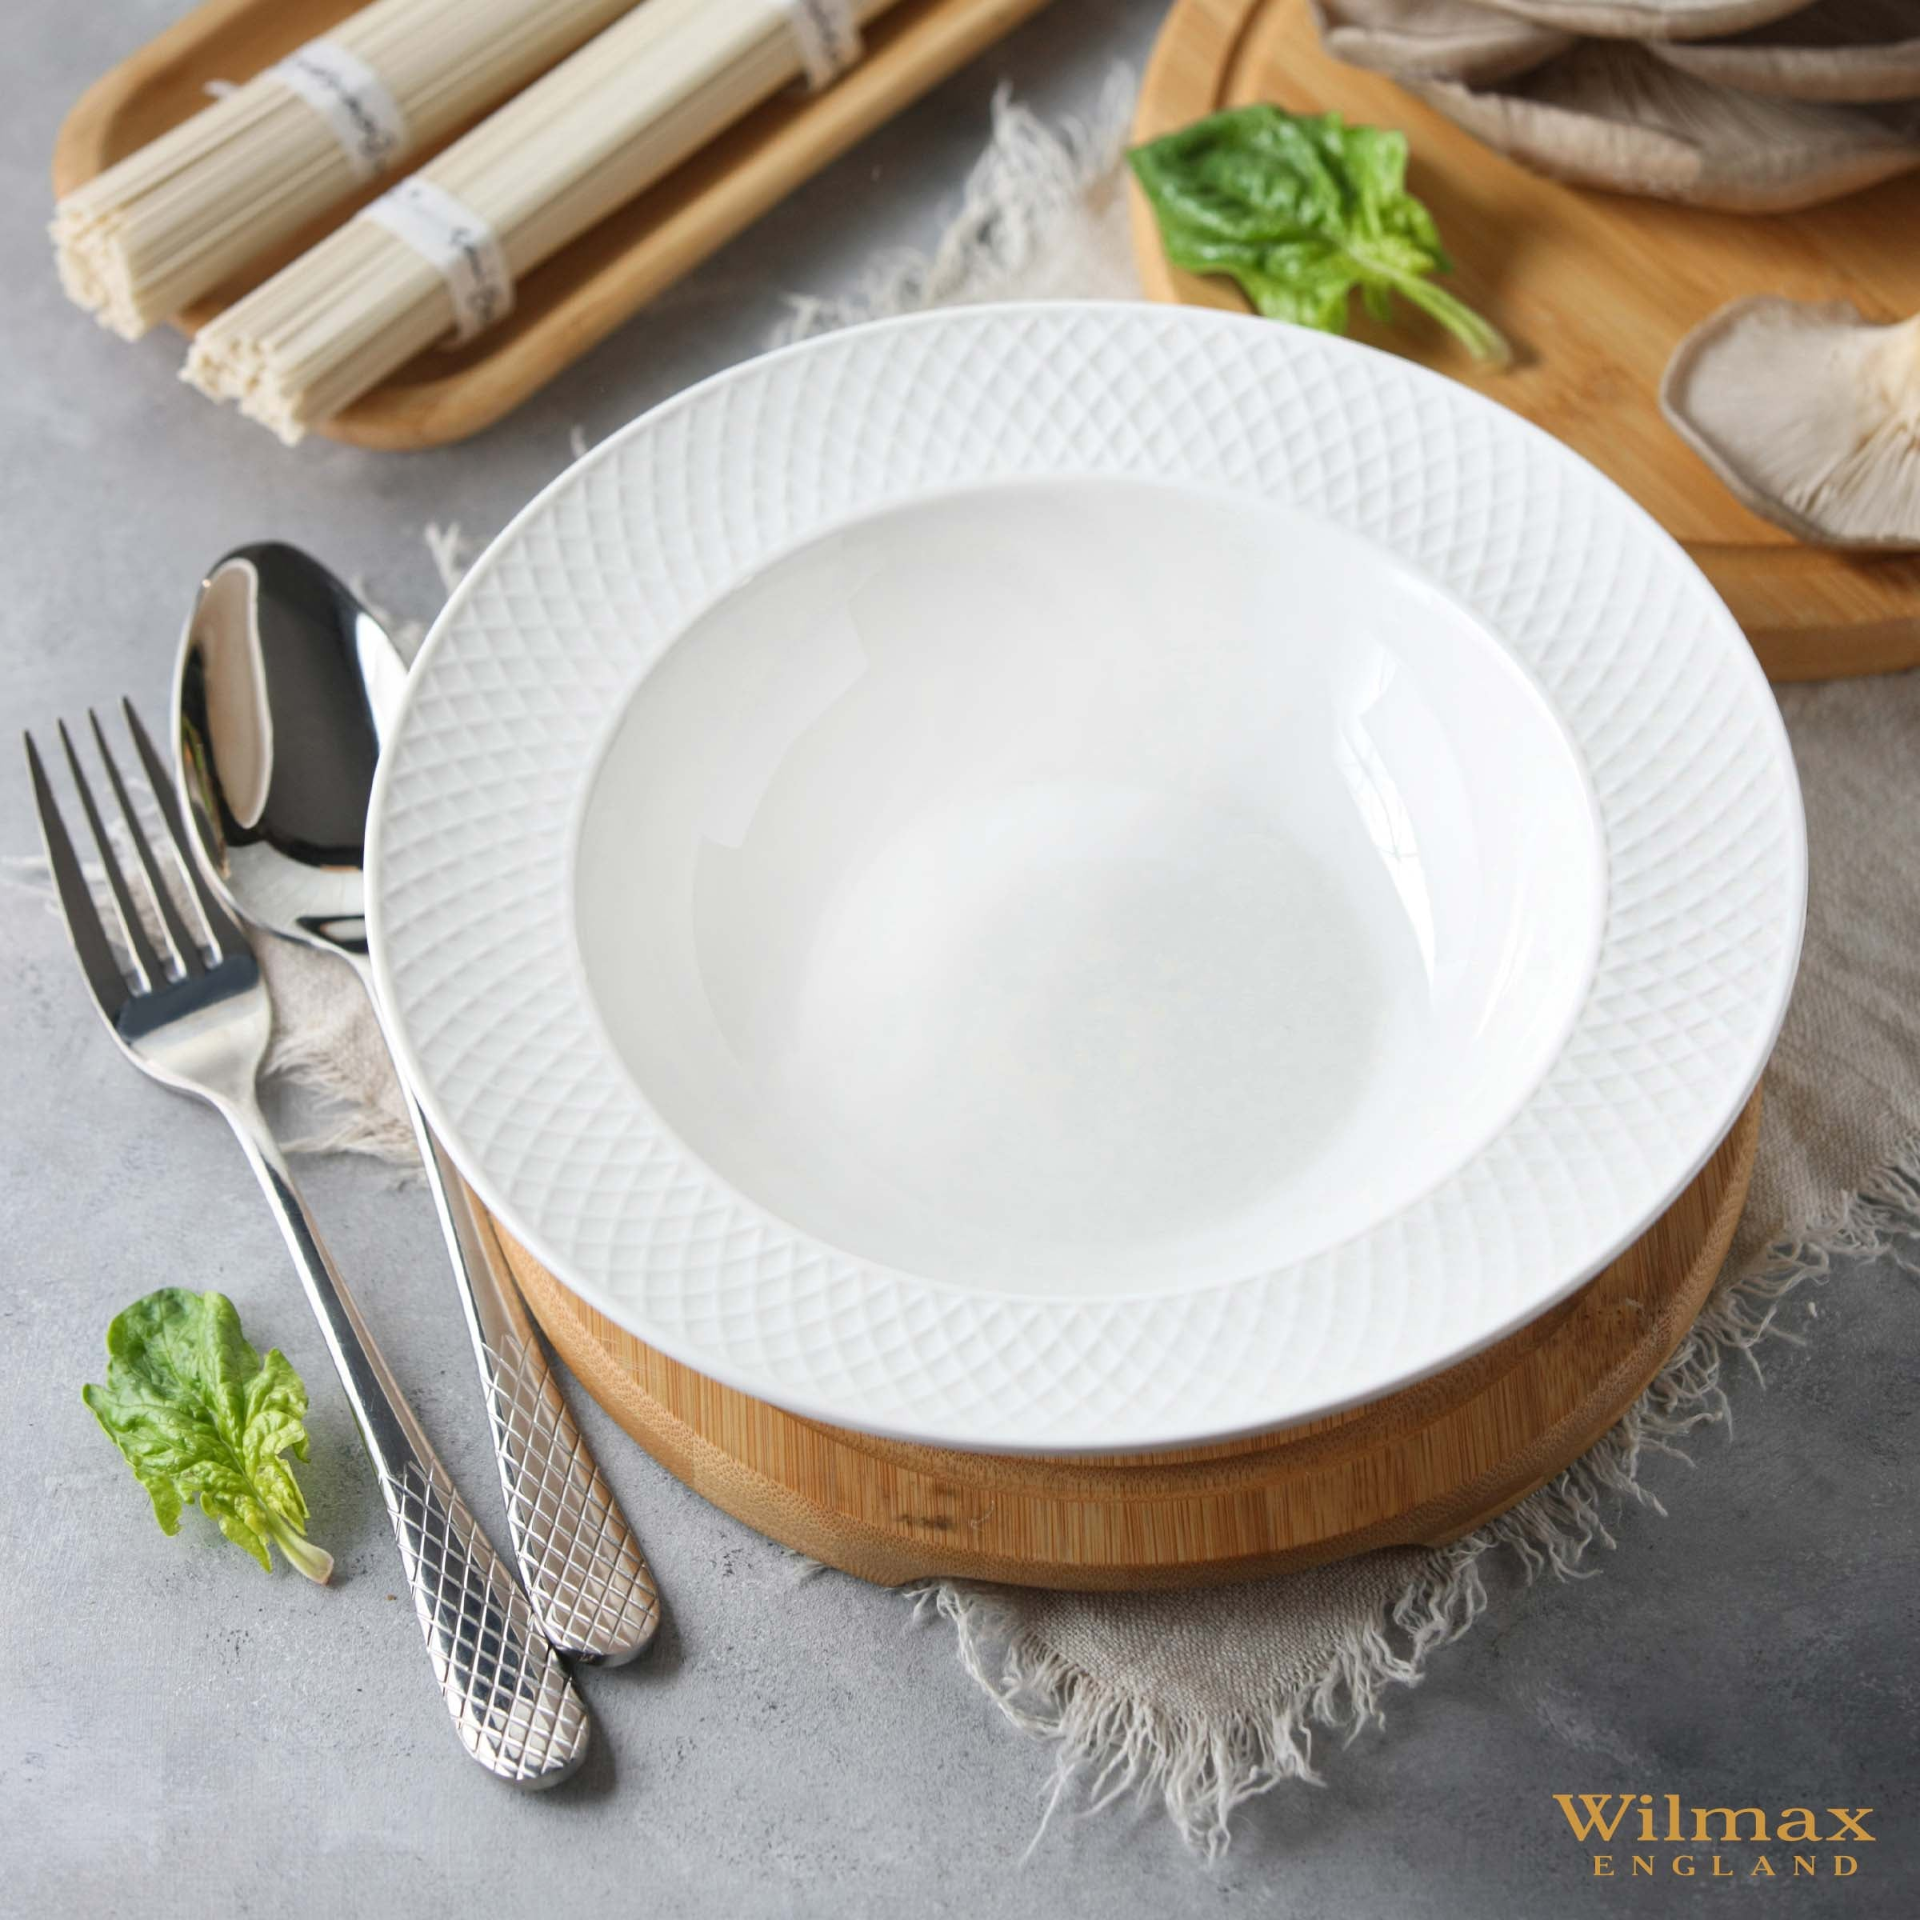 Dinner Spoon 8" inch | 21 Cm In White Box - High-Quality Cutlery for Maximum Comfort, Goodies N Stuff